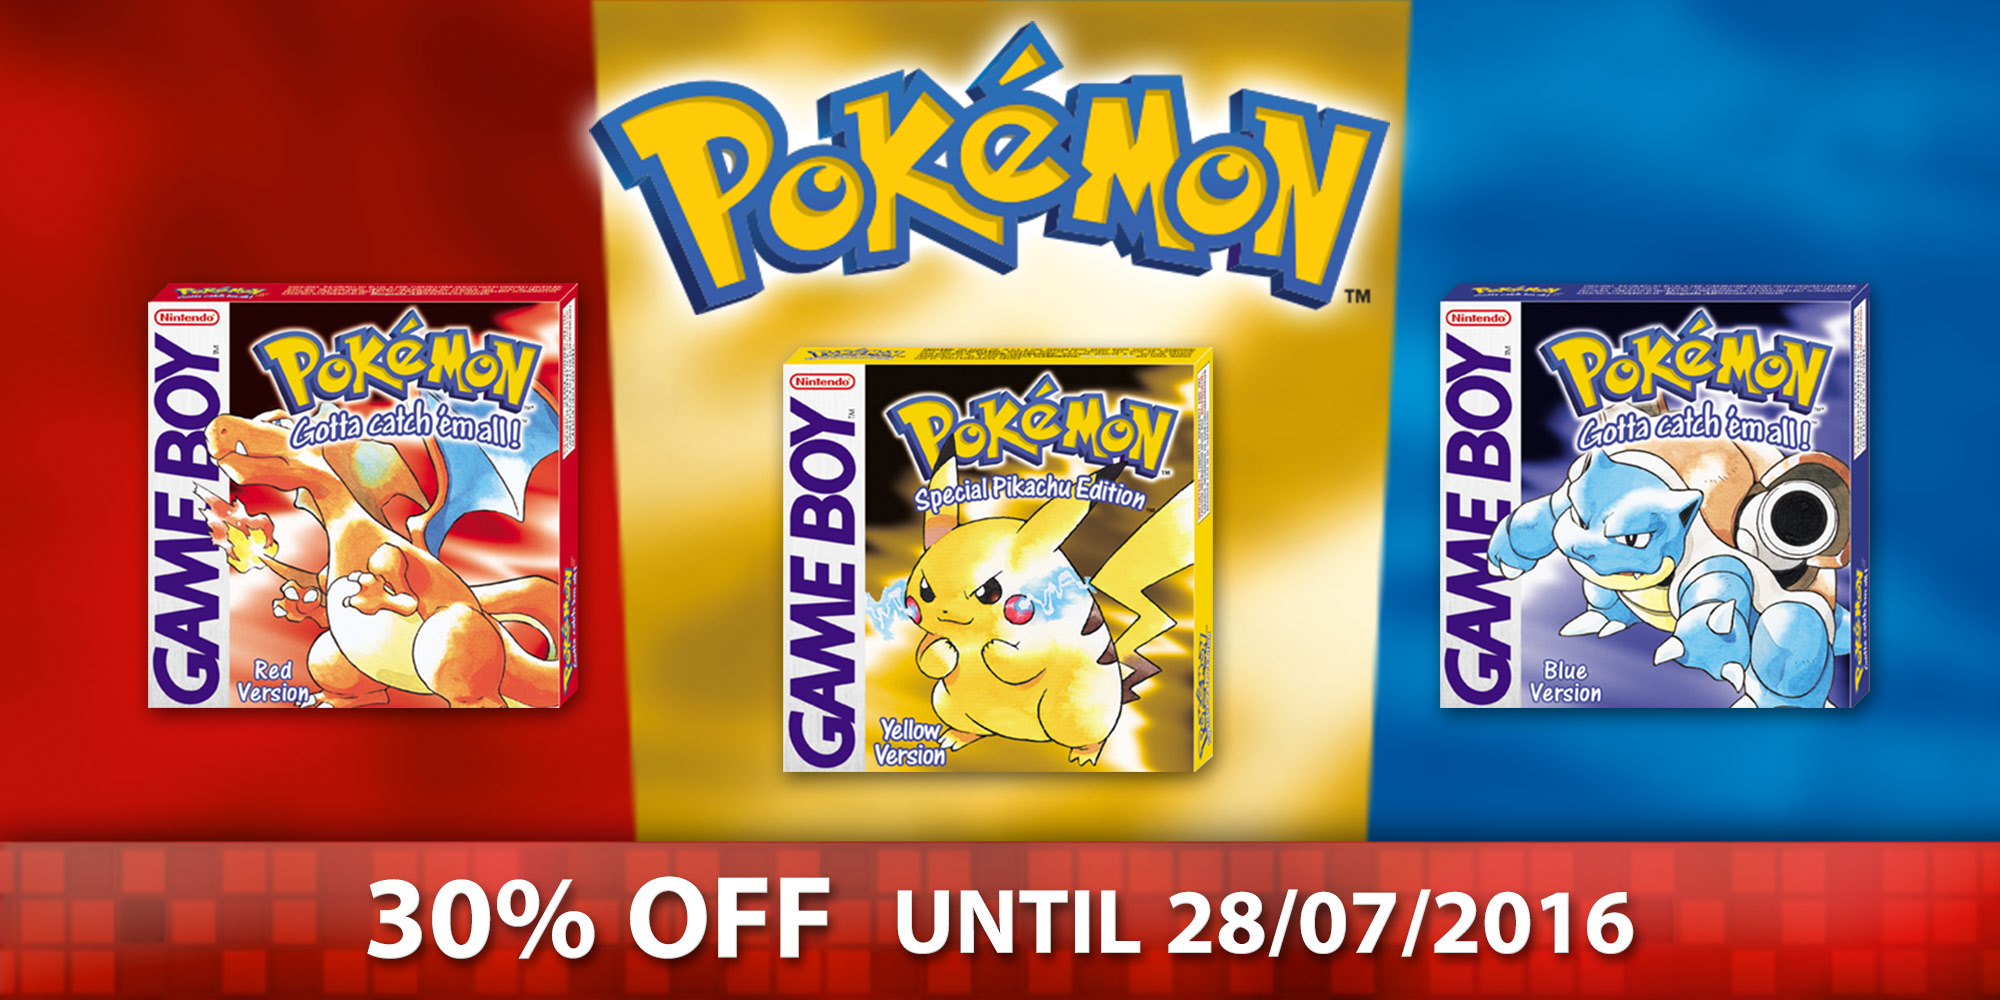 Pokemon Red, Blue, and Yellow versions re-releasing on Nintendo 3DS